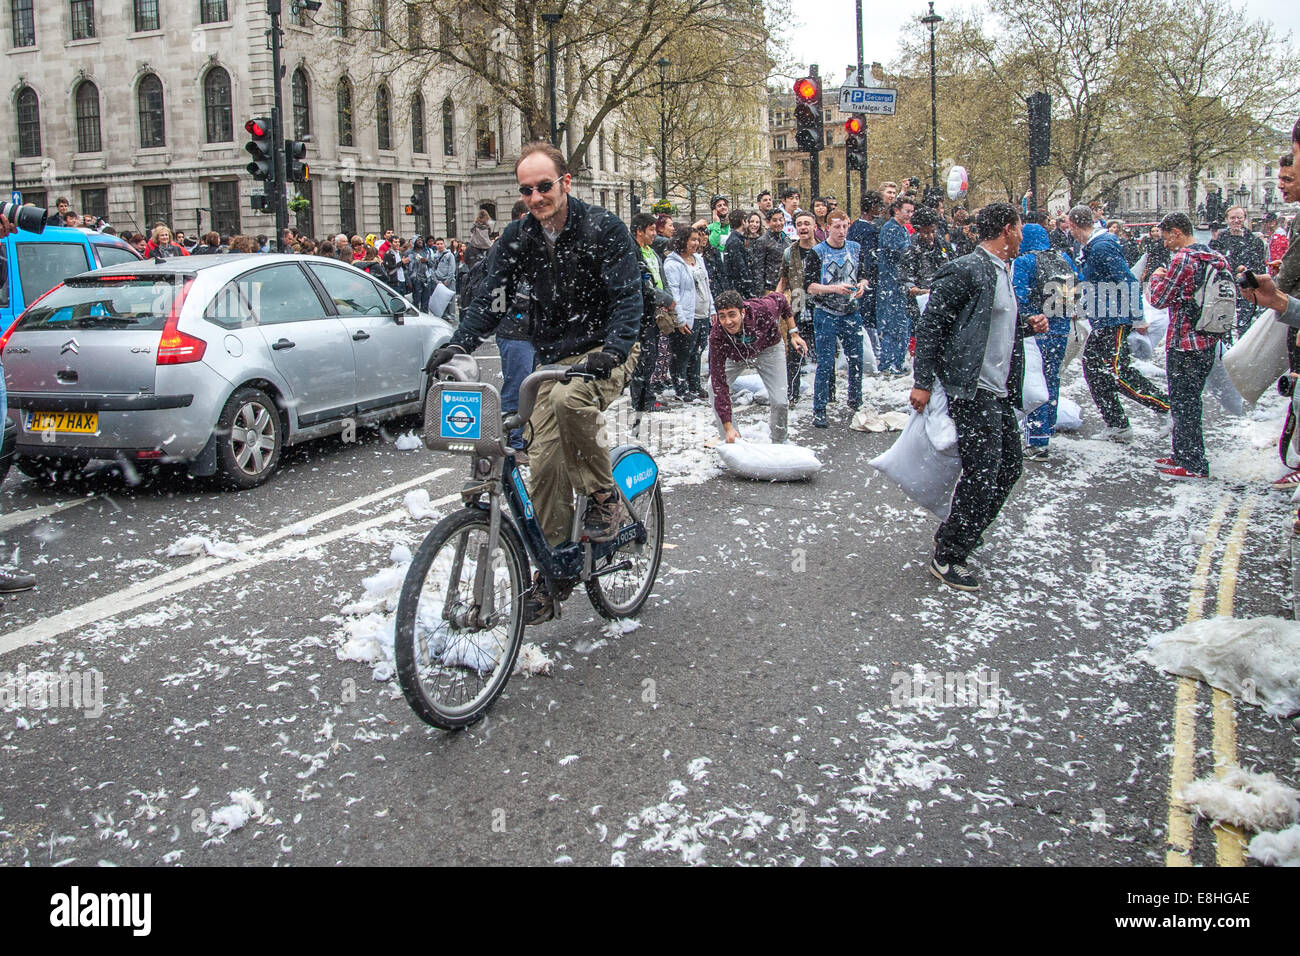 A cyclist on a Boris Bike rides through the commotion as Londoners pillow fight in the street around Trafalgar Square during International Pillow Fight Day 2014  Where: London, England, United Kingdom When: 05 Apr 2014 Stock Photo